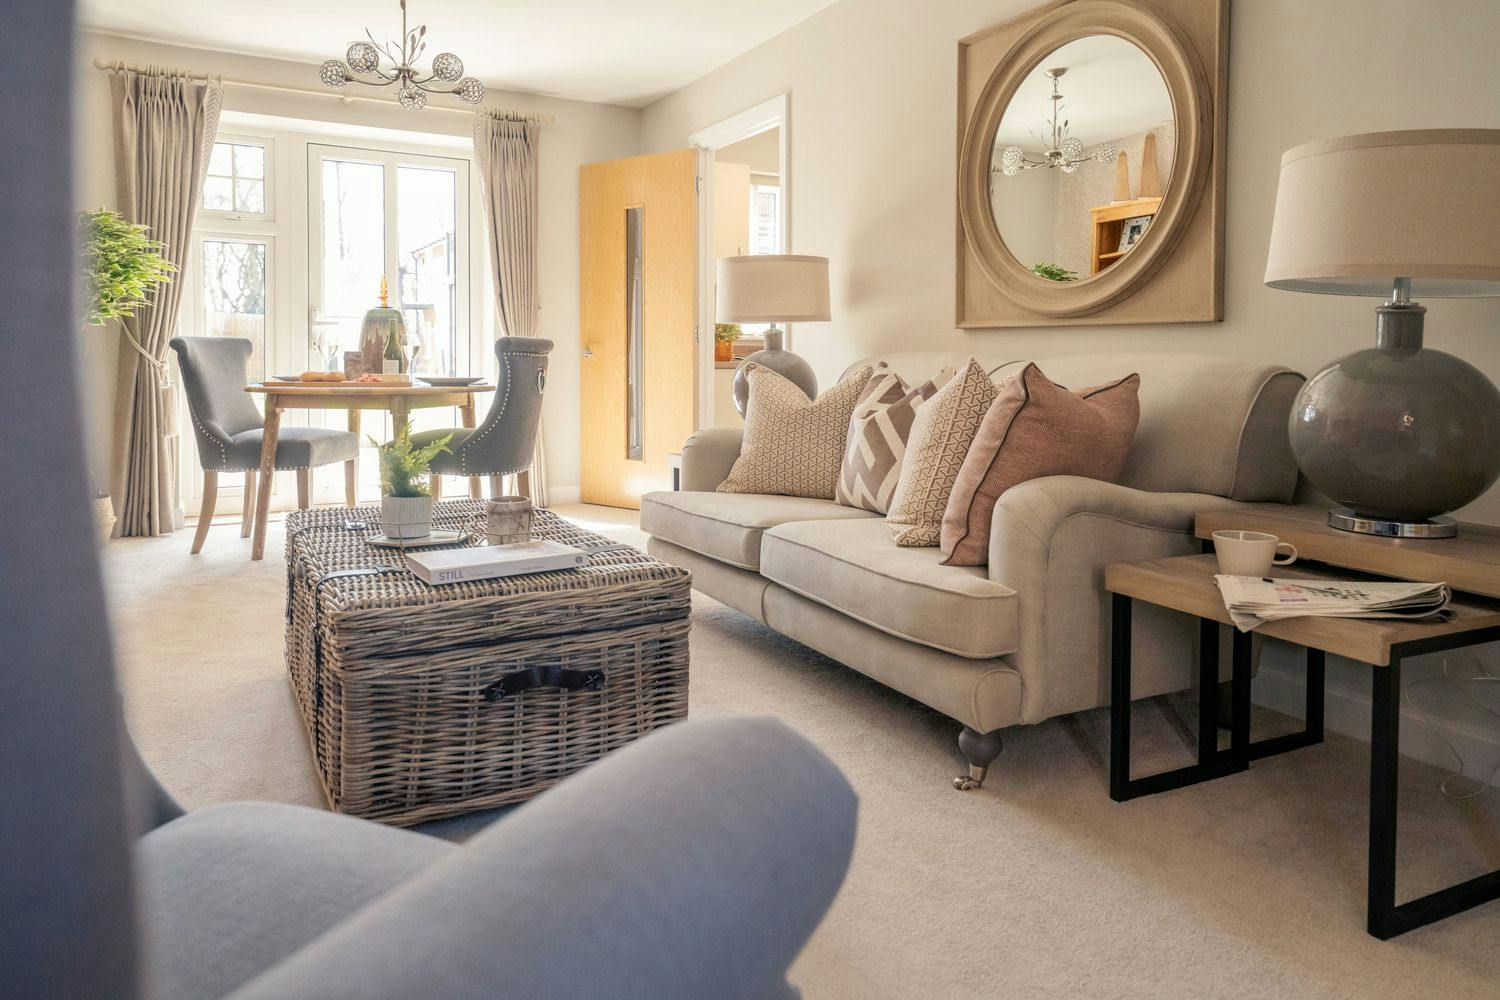 Living Room at Beacon Court Retirement Development in Anstruther, Fife